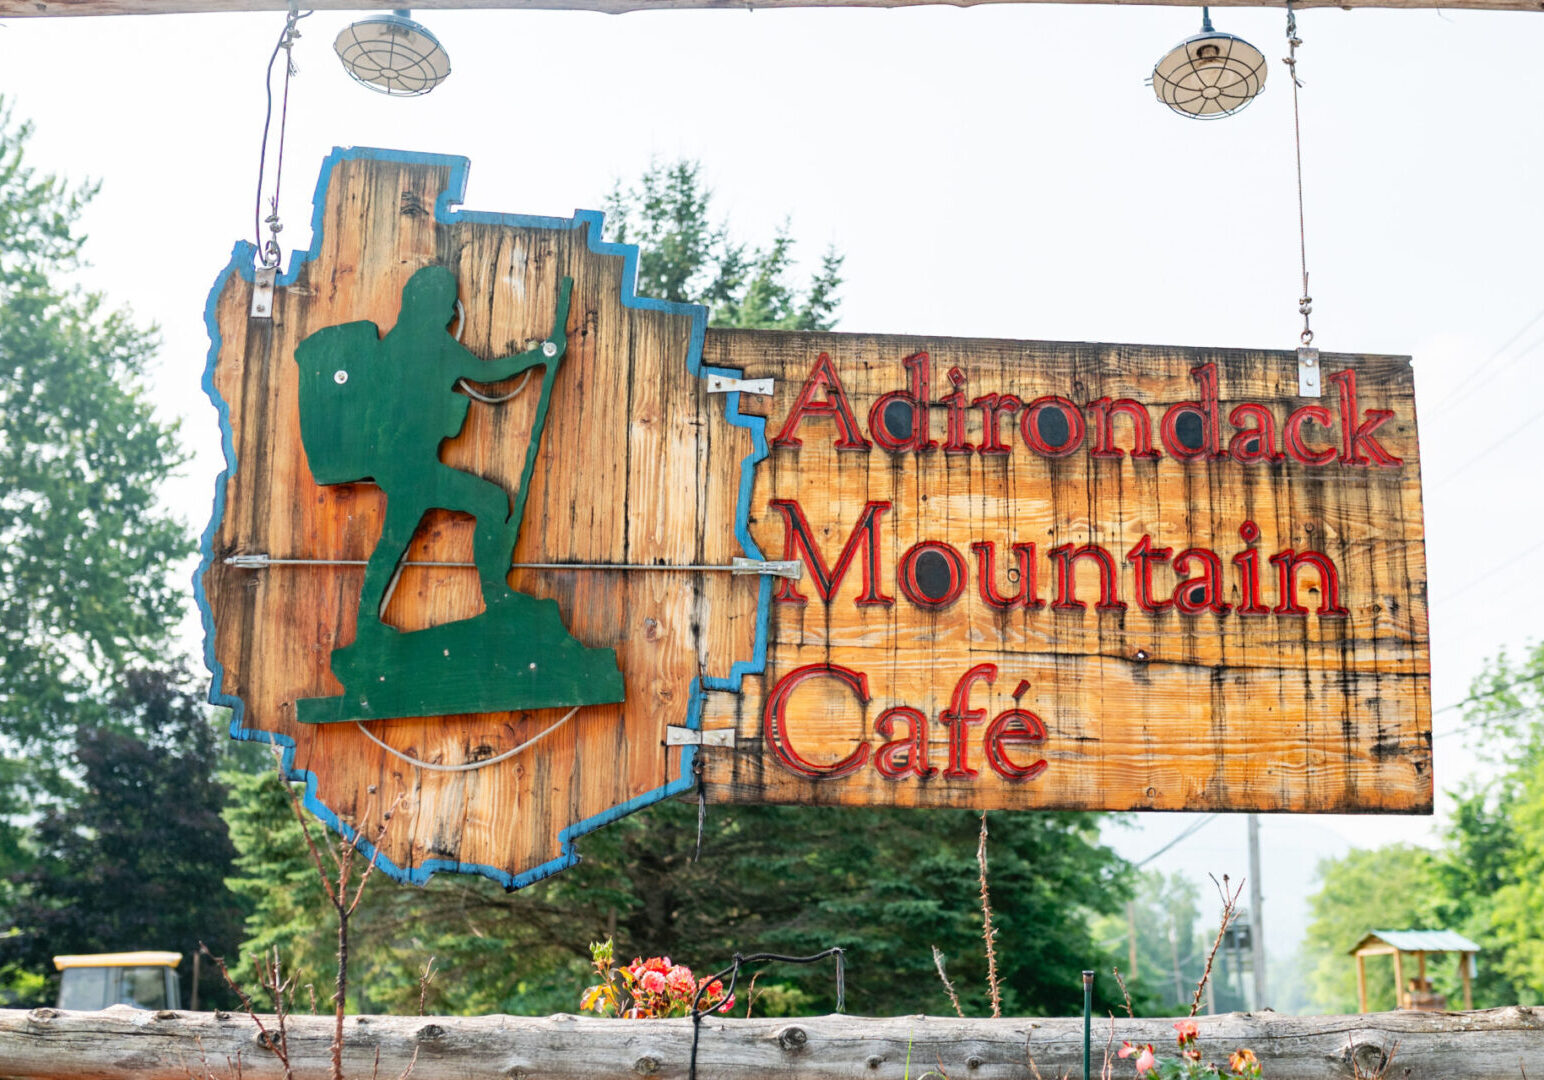 A sign for the mountain cafe in the mountains.